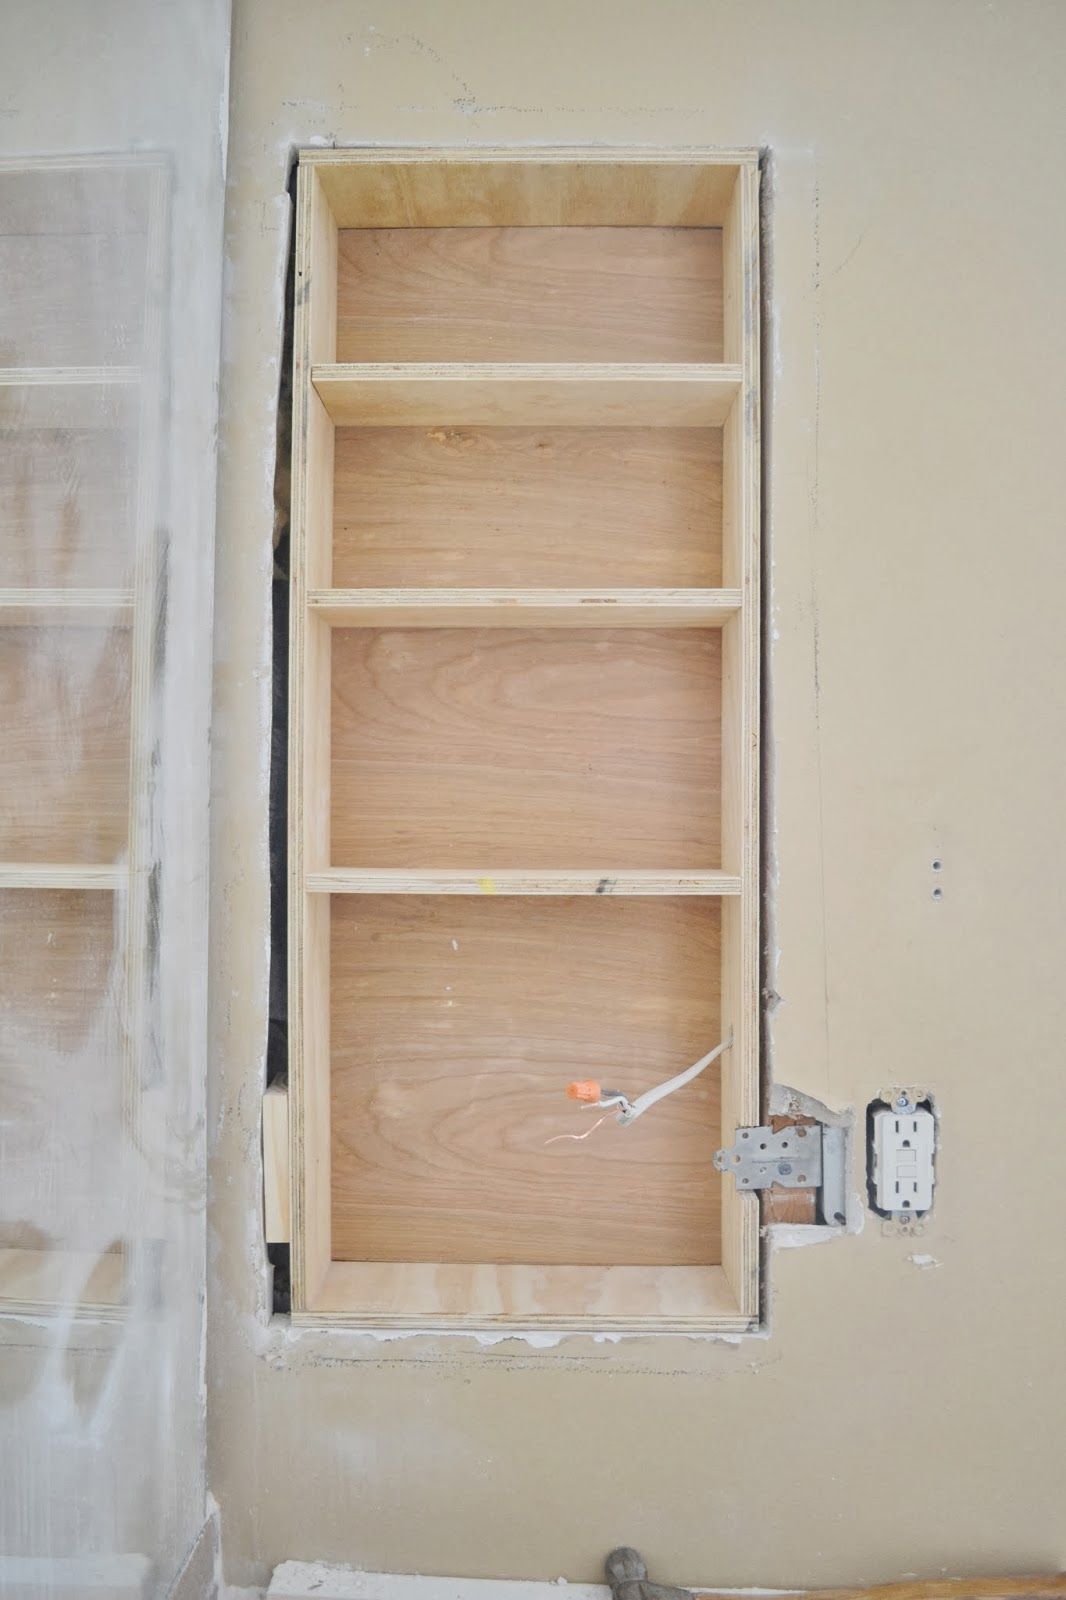 Between The Studs Storage – Adding More Storage to the Master Bathroom between the wall studs – DIY